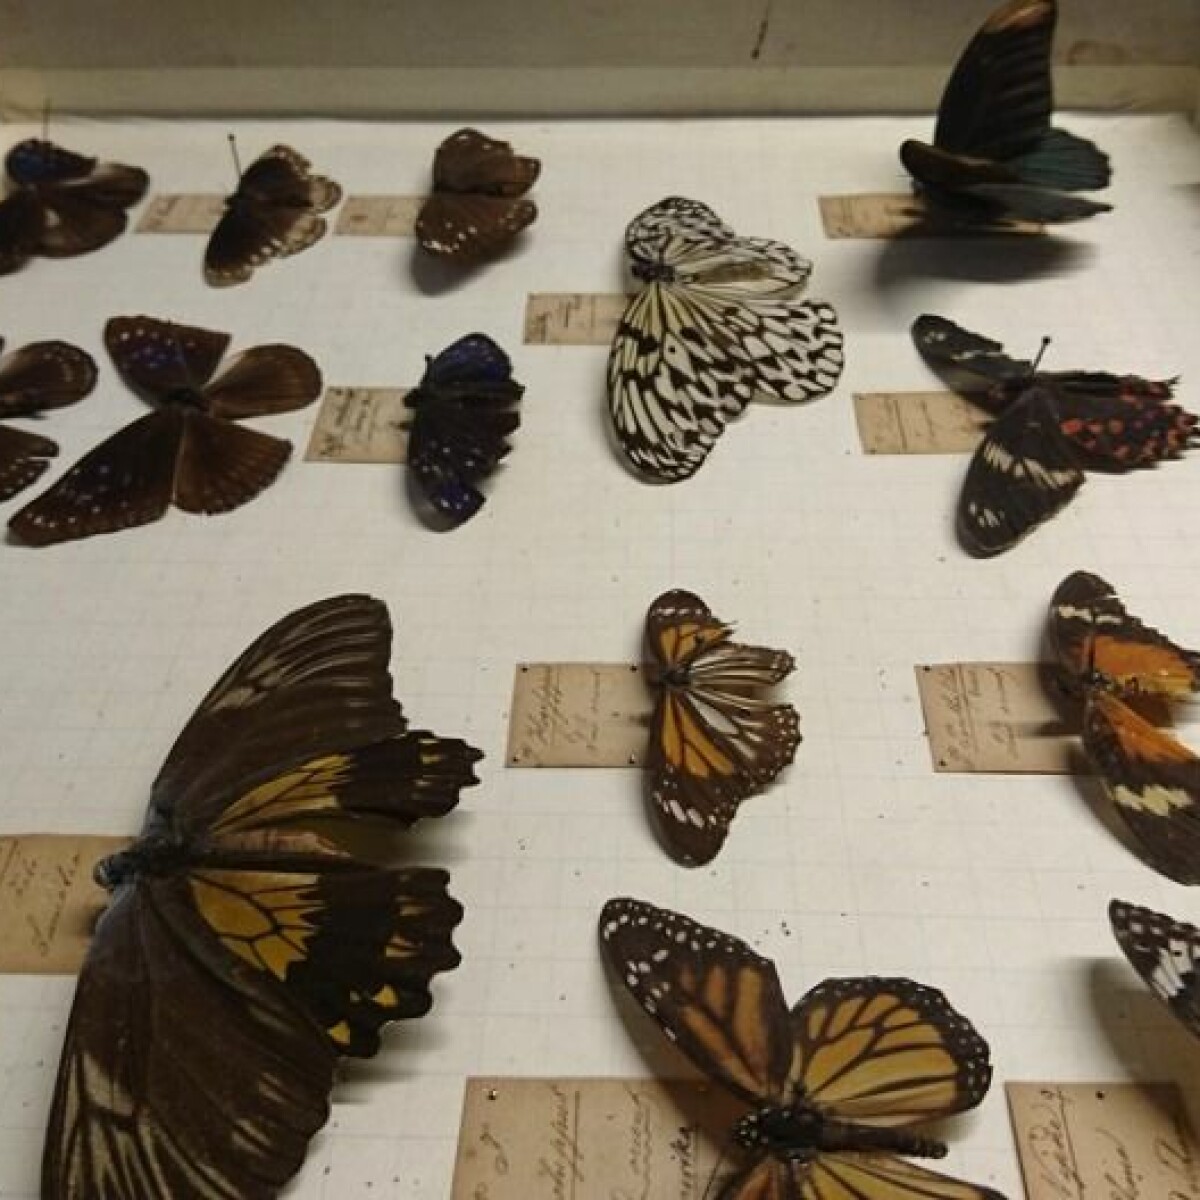 Two-hundred-year old butterflies allow research to take wing